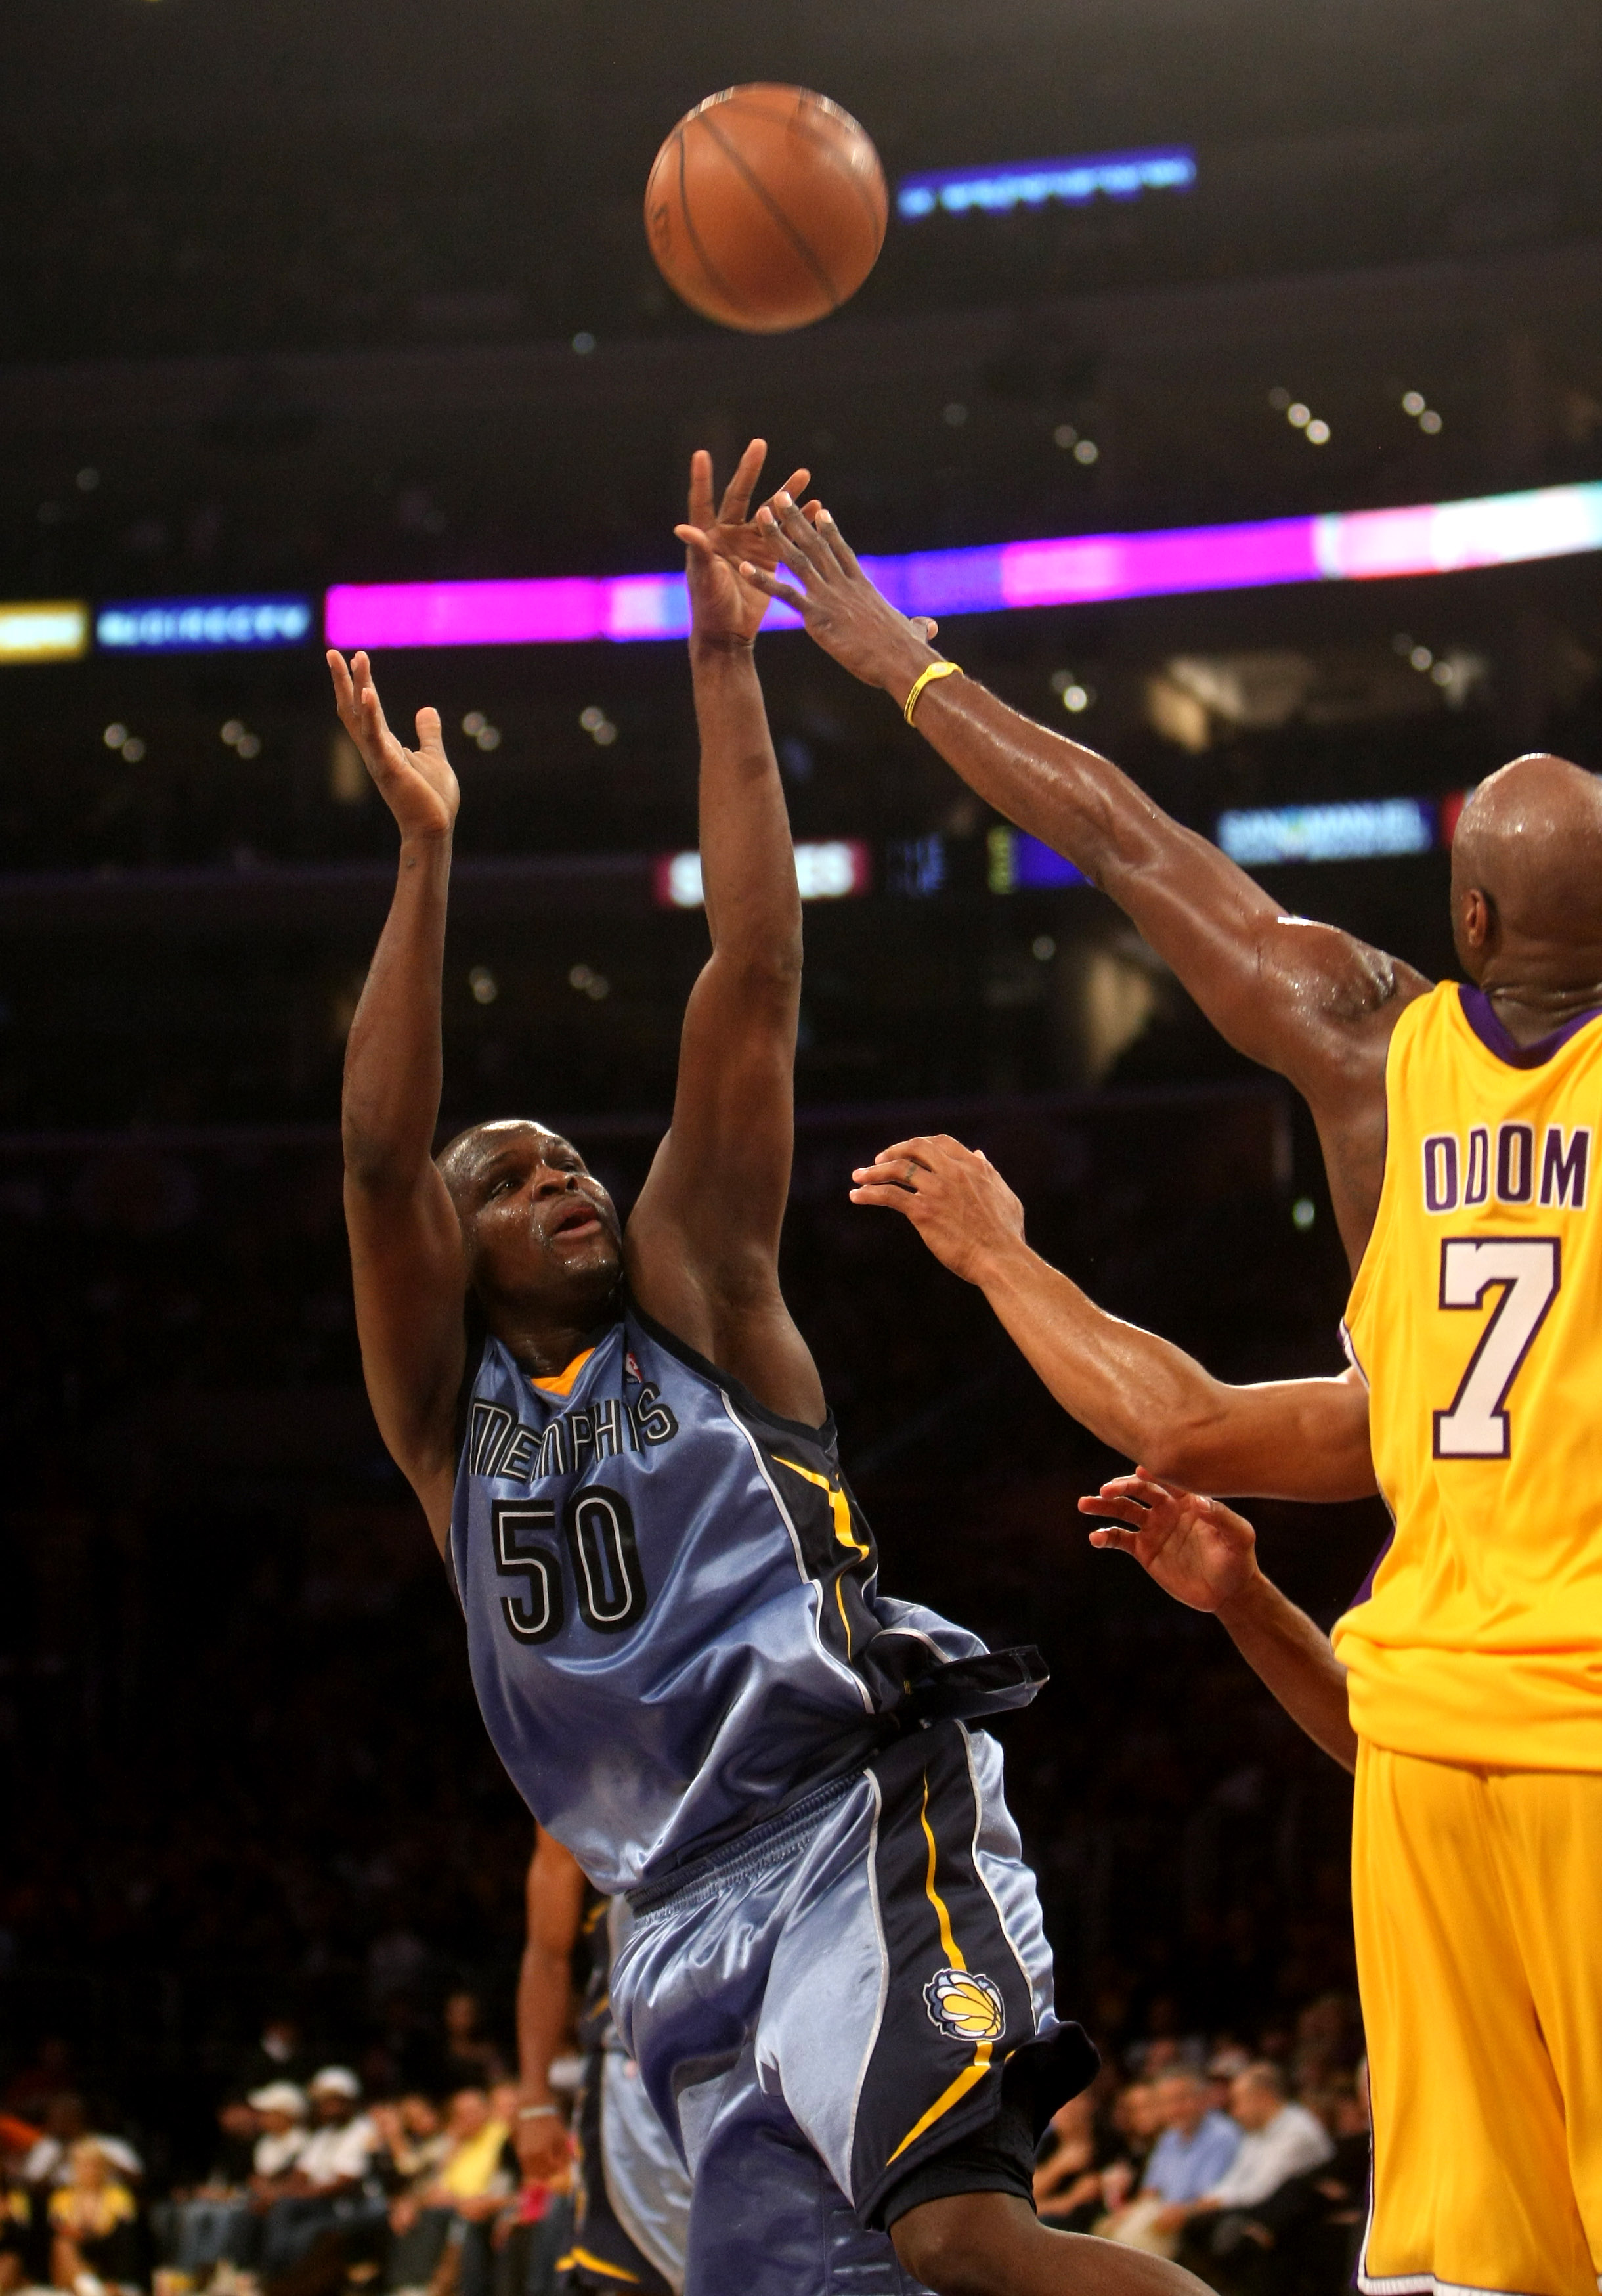 LOS ANGELES - NOVEMBER 6:   Zach Randolph #50 of the Memphis Grizzlies shoots over Lamar Odom #7 of the Los Angeles Lakers on November 6, 2009 at Staples Center in Los Angeles, California. The Lakers won 114-98.  NOTE TO USER: User expressly acknowledges